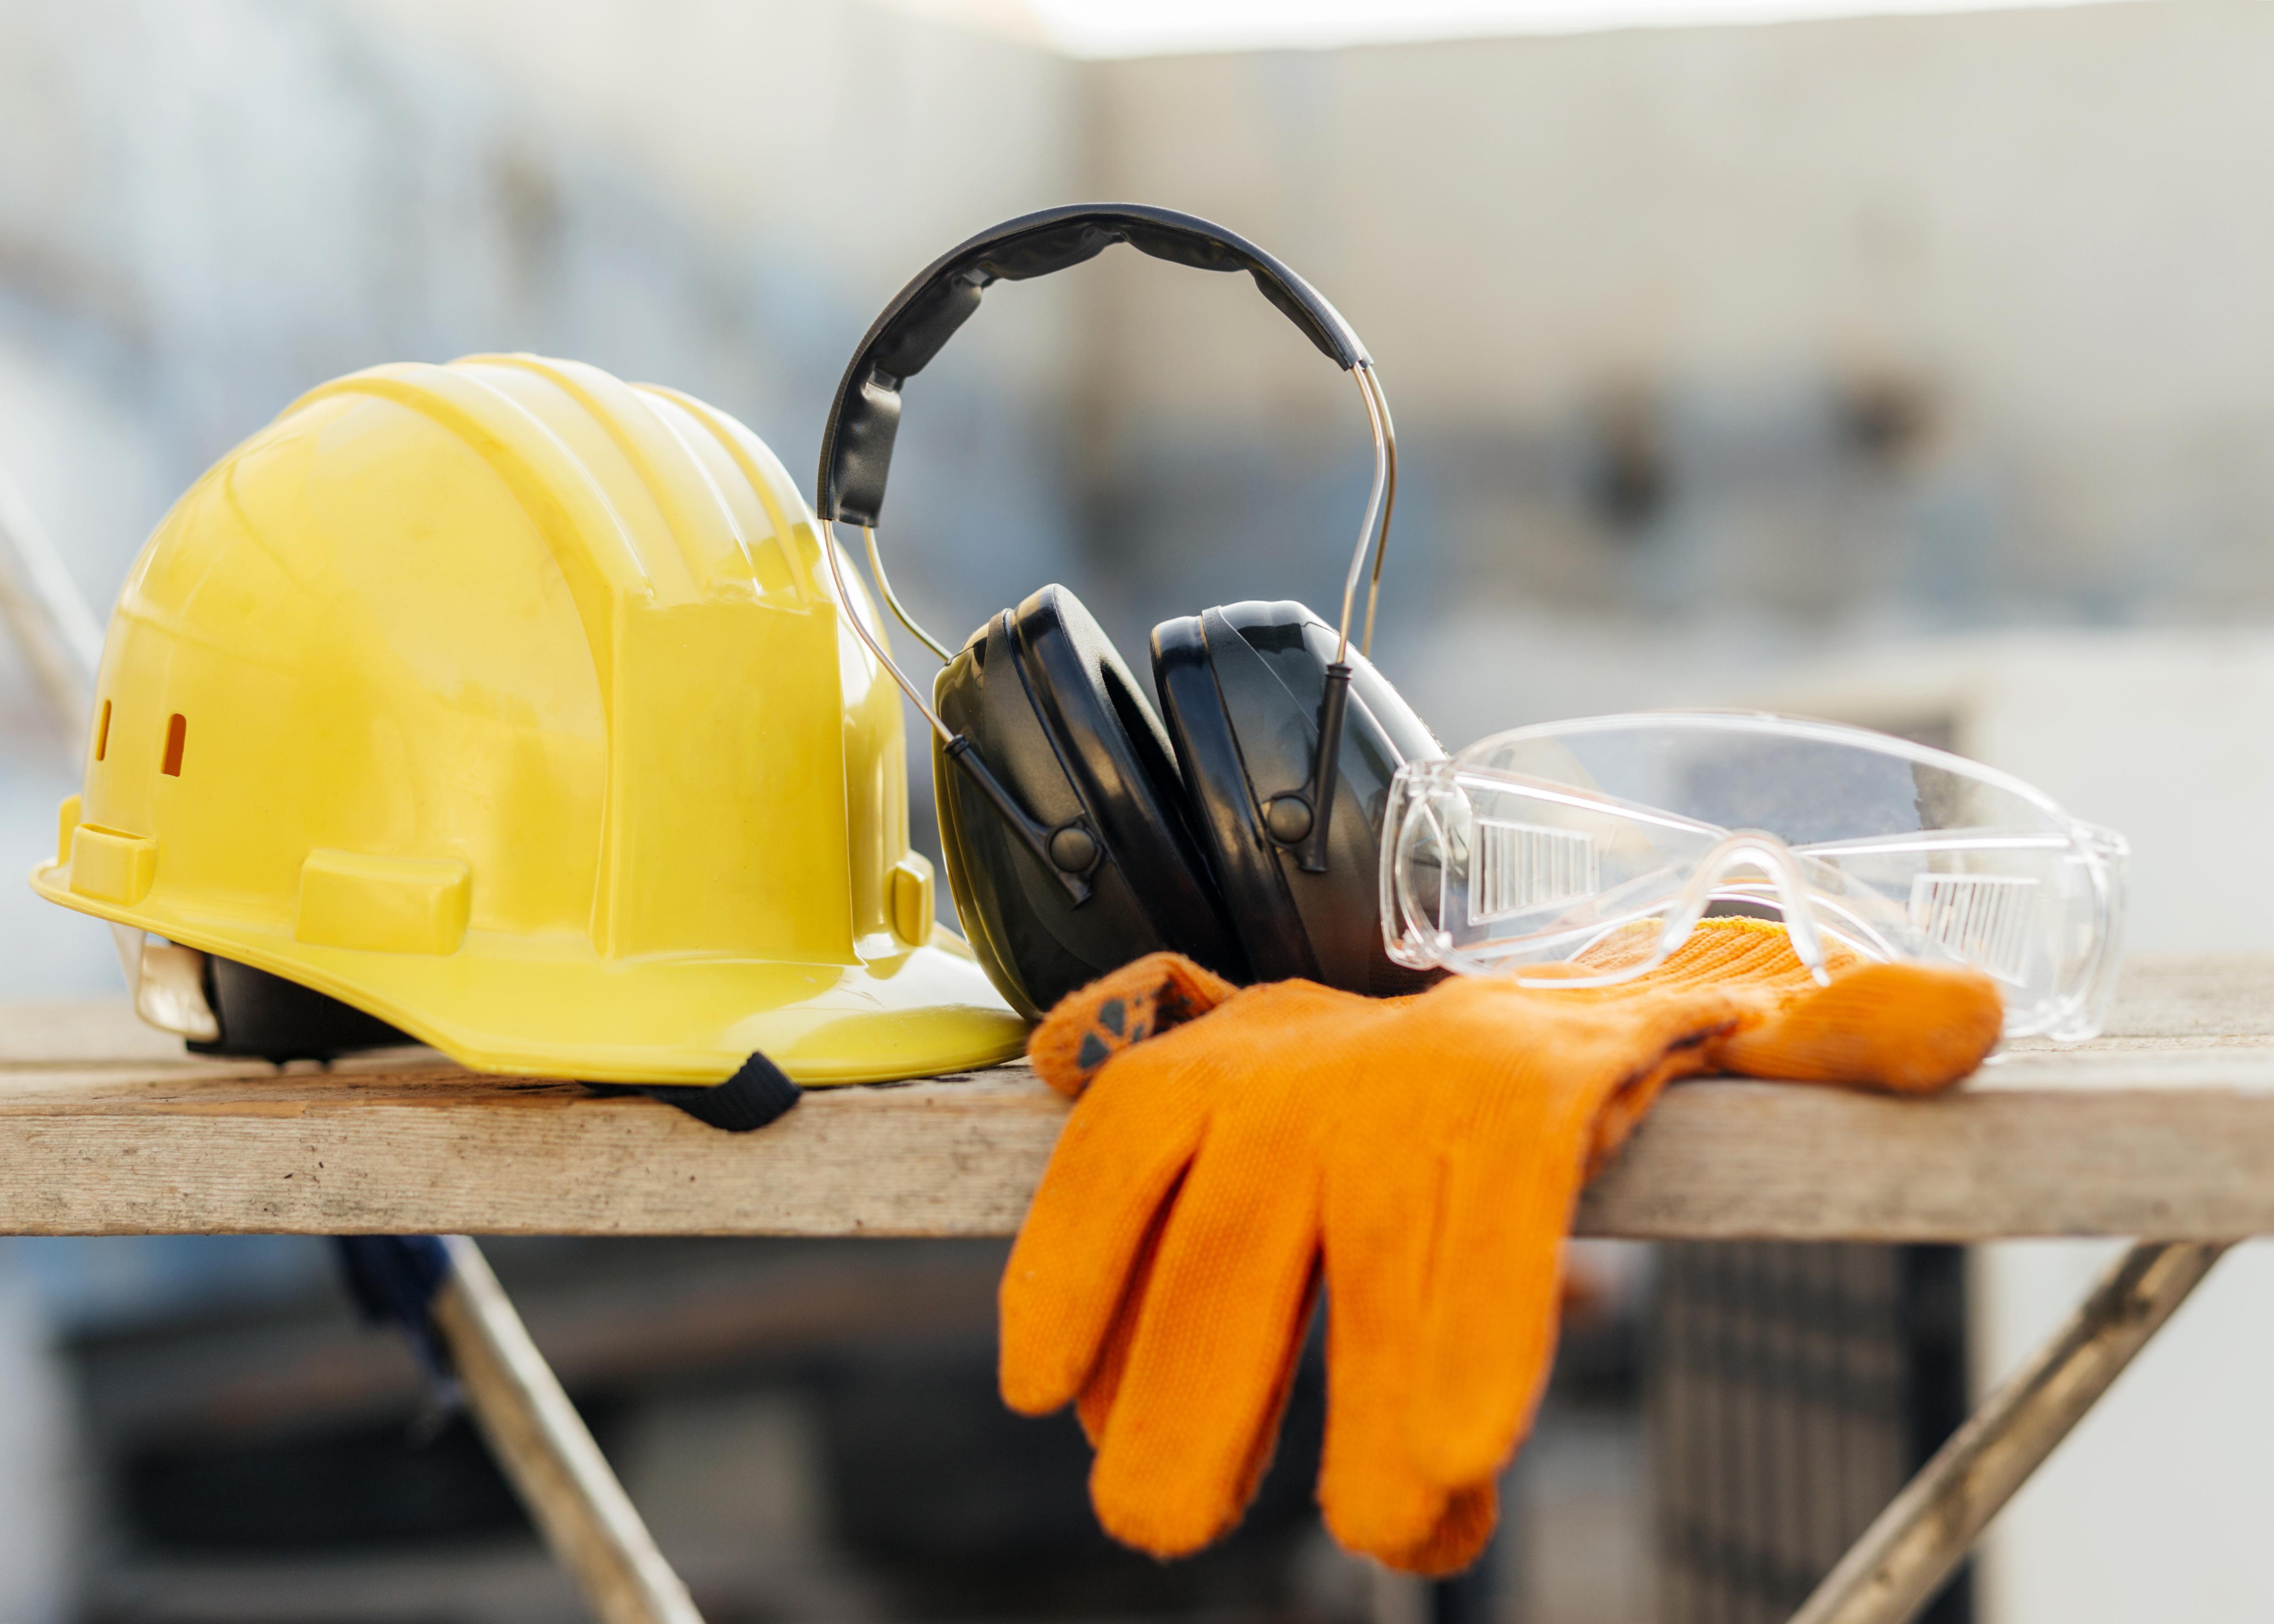 Изображение от <a href="https://ru.freepik.com/free-photo/front-view-of-protective-glasses-with-hard-hat-and-headphones_11403385.htm#query=%D0%BE%D0%BF%D0%B0%D1%81%D0%BD%D0%B0%D1%8F%20%D1%80%D0%B0%D0%B1%D0%BE%D1%82%D0%B0&position=2&from_view=search&track=